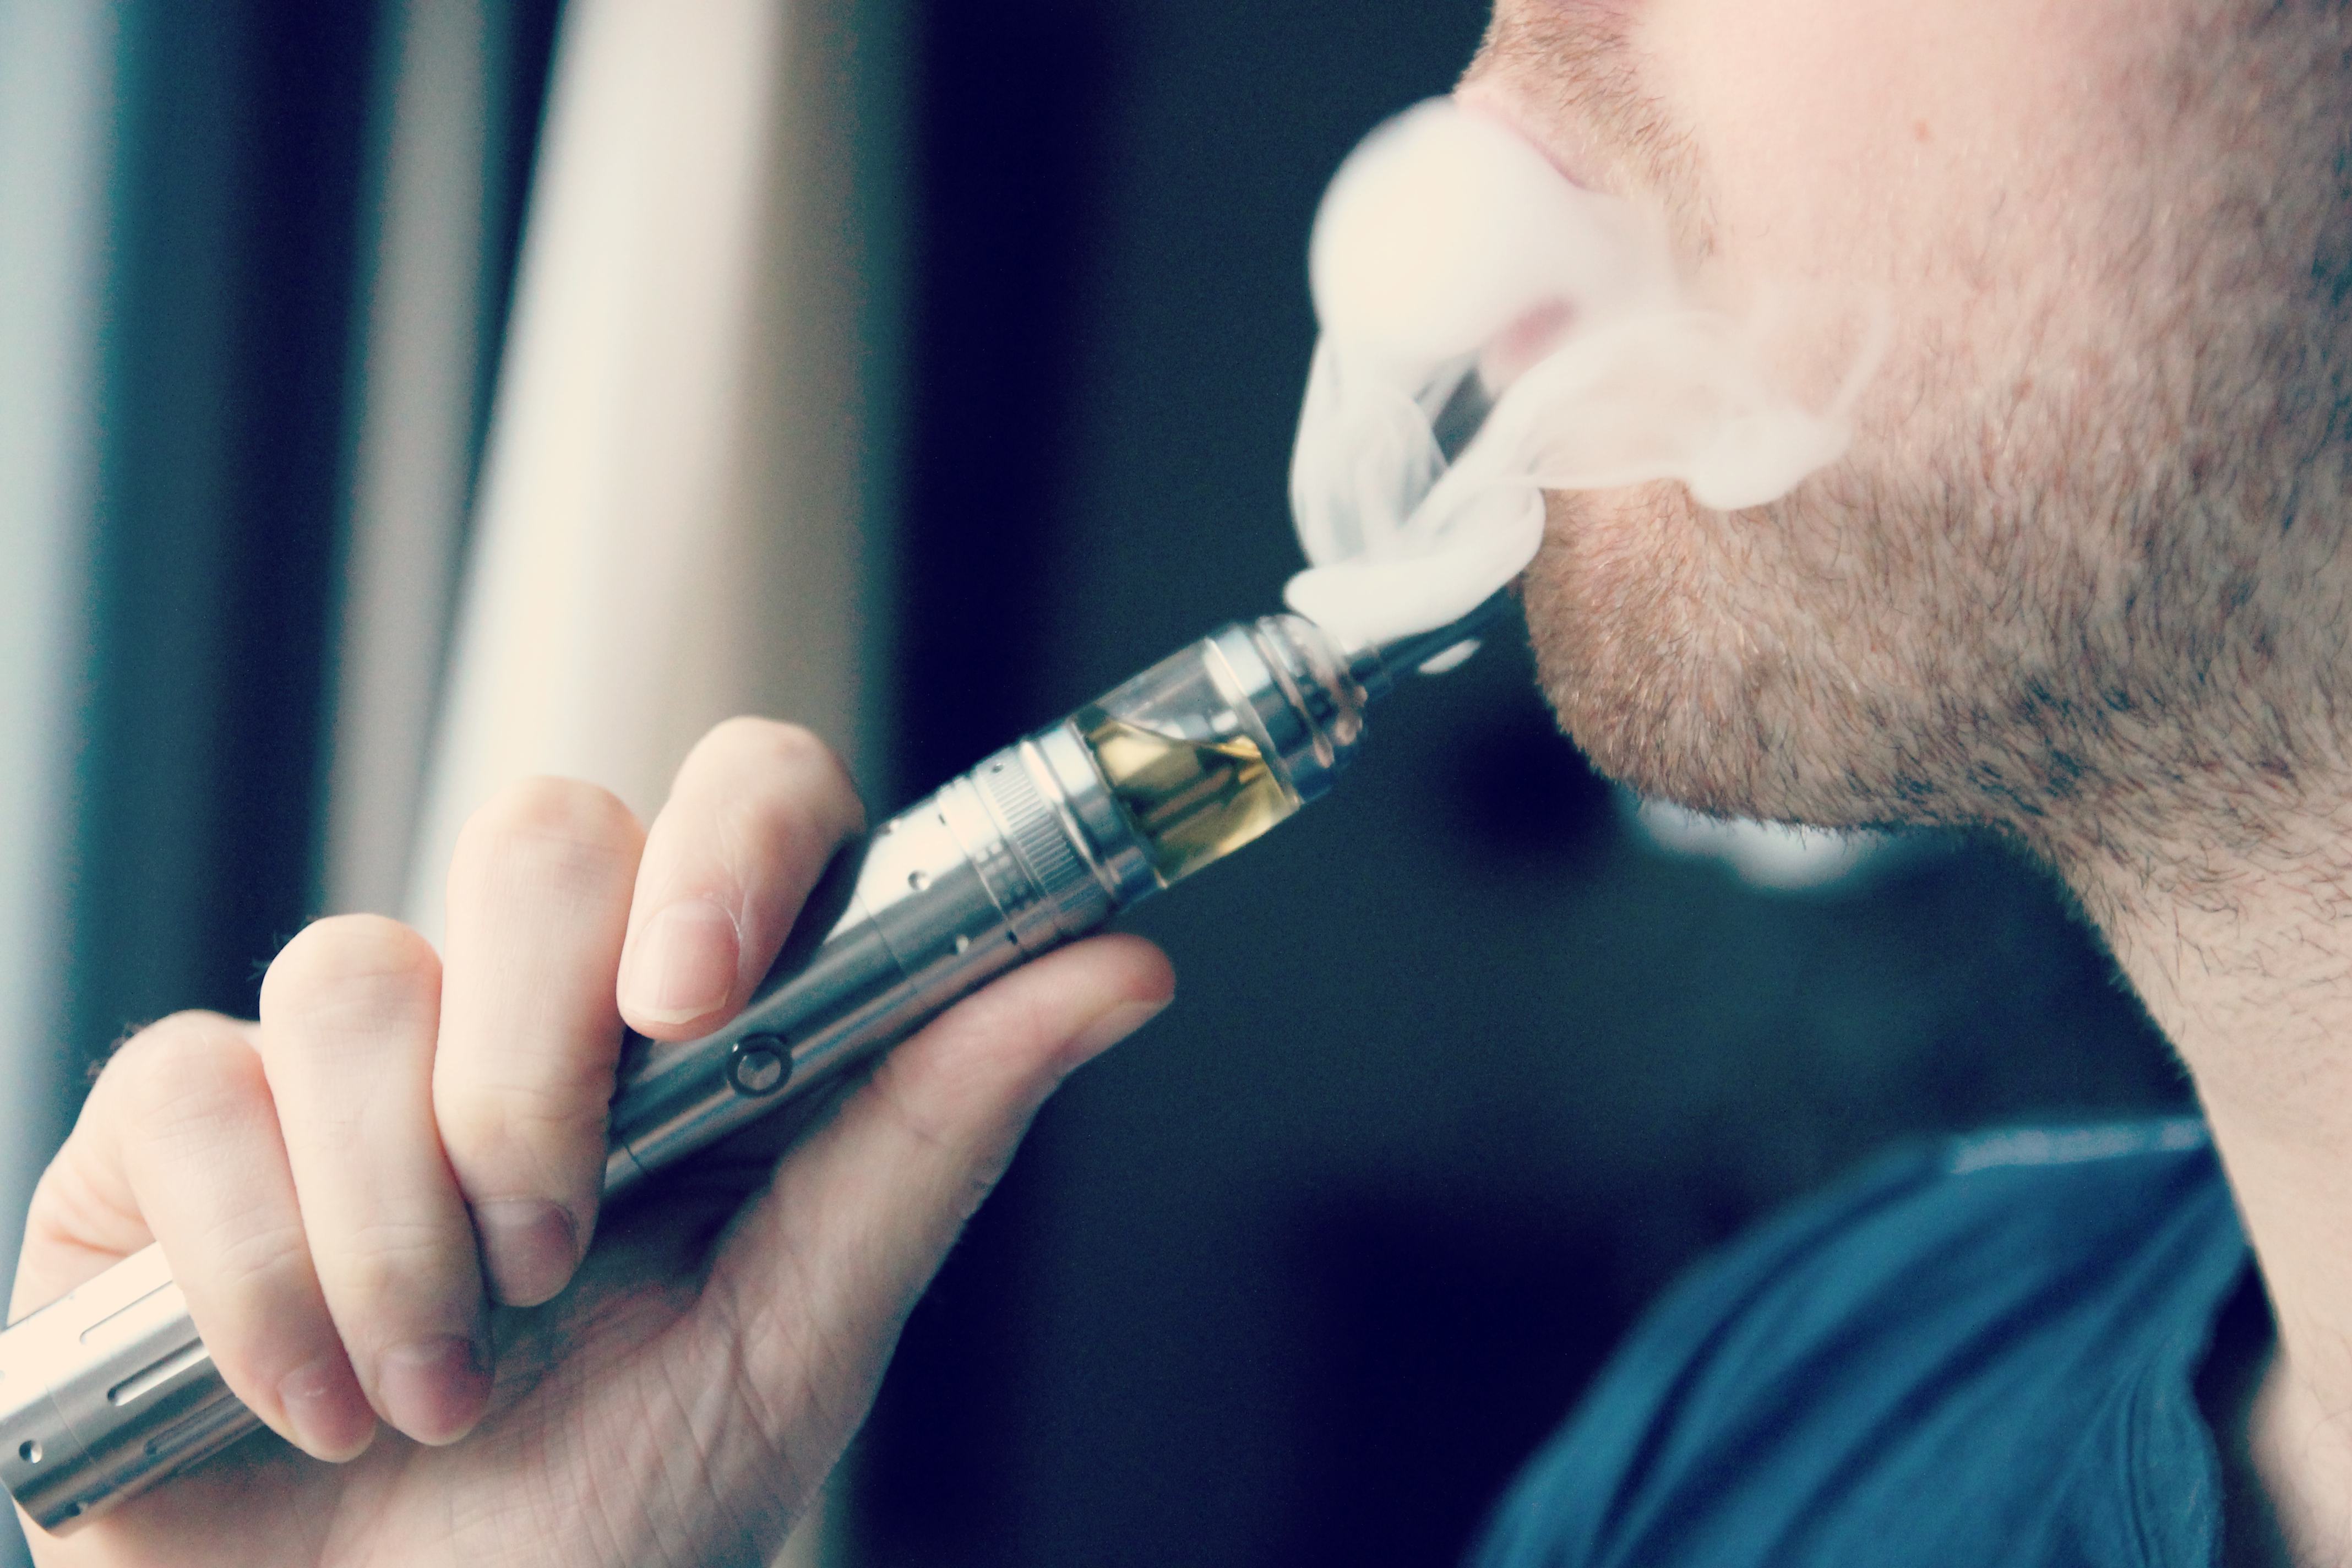 Big Changes for the Vapor Industry